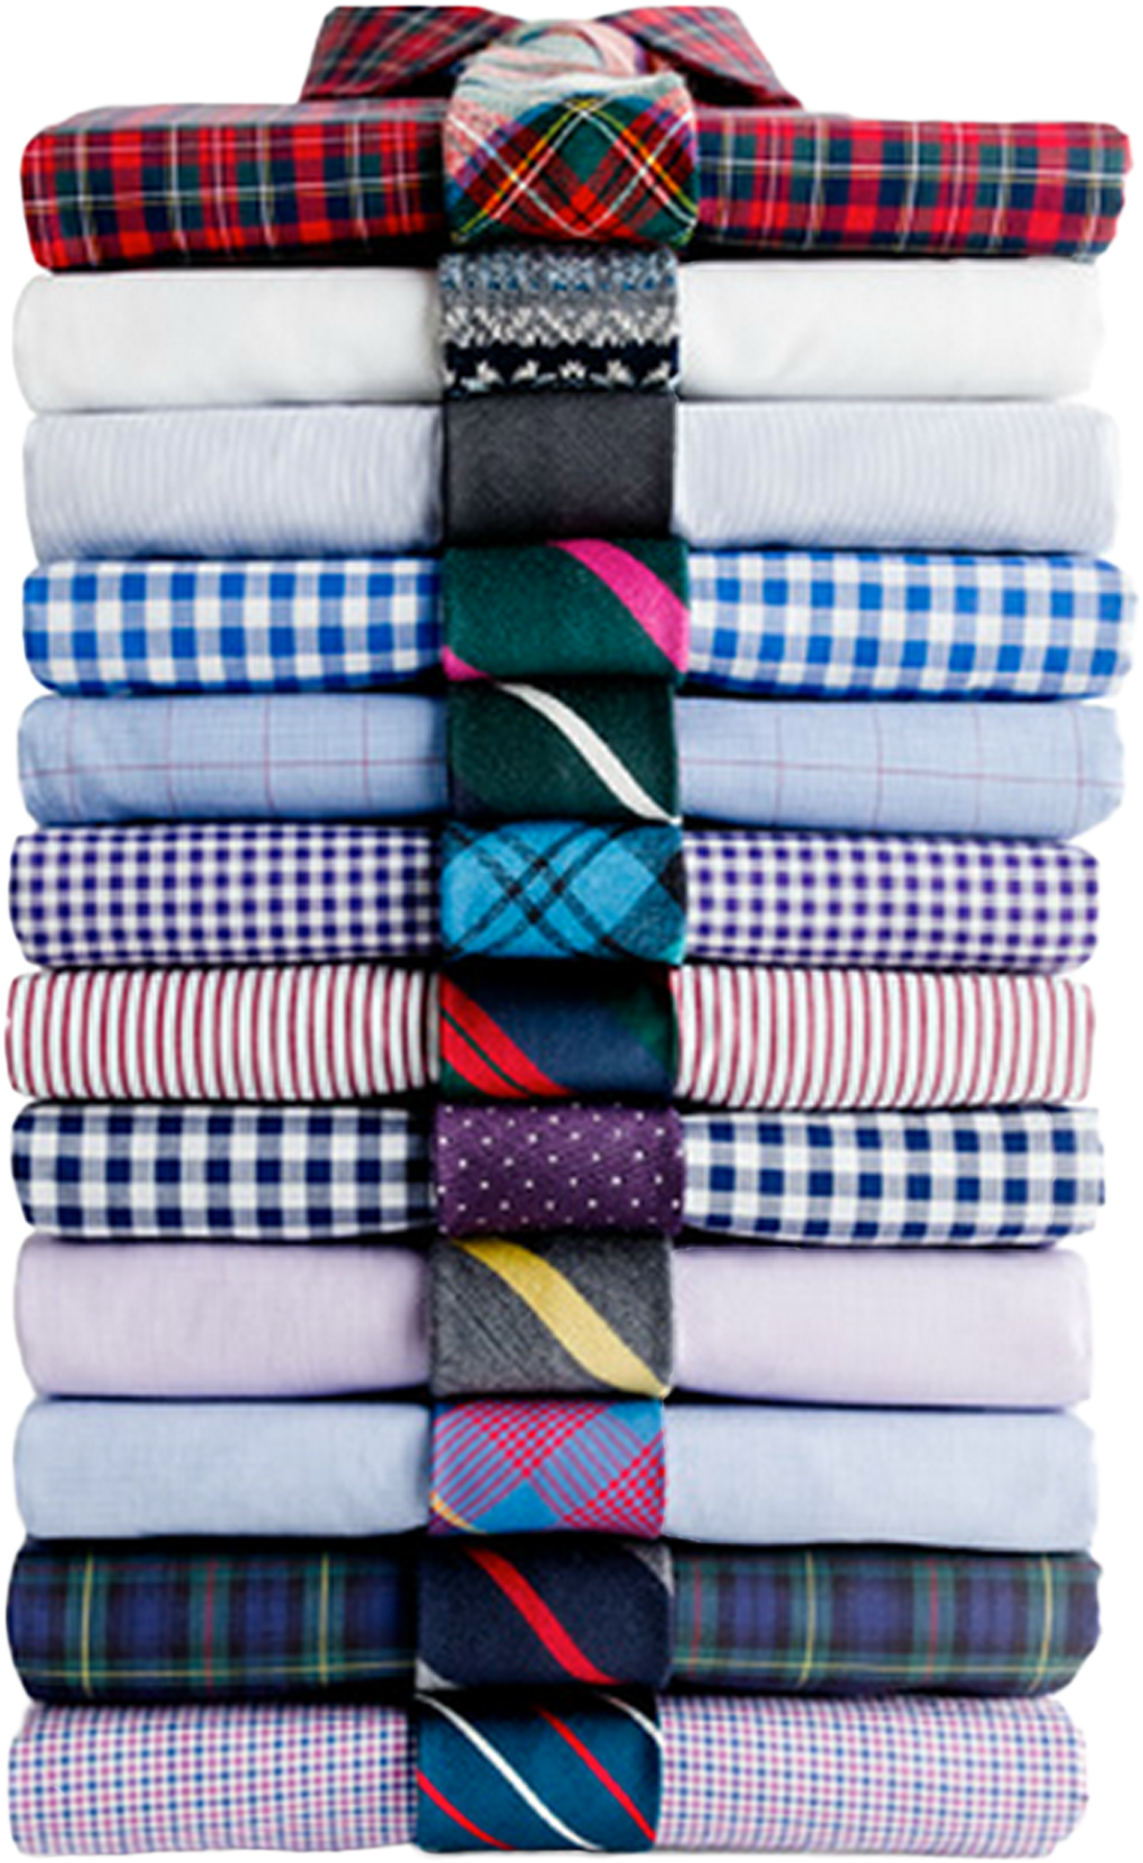 Folded Shirtsand Ties Stack PNG